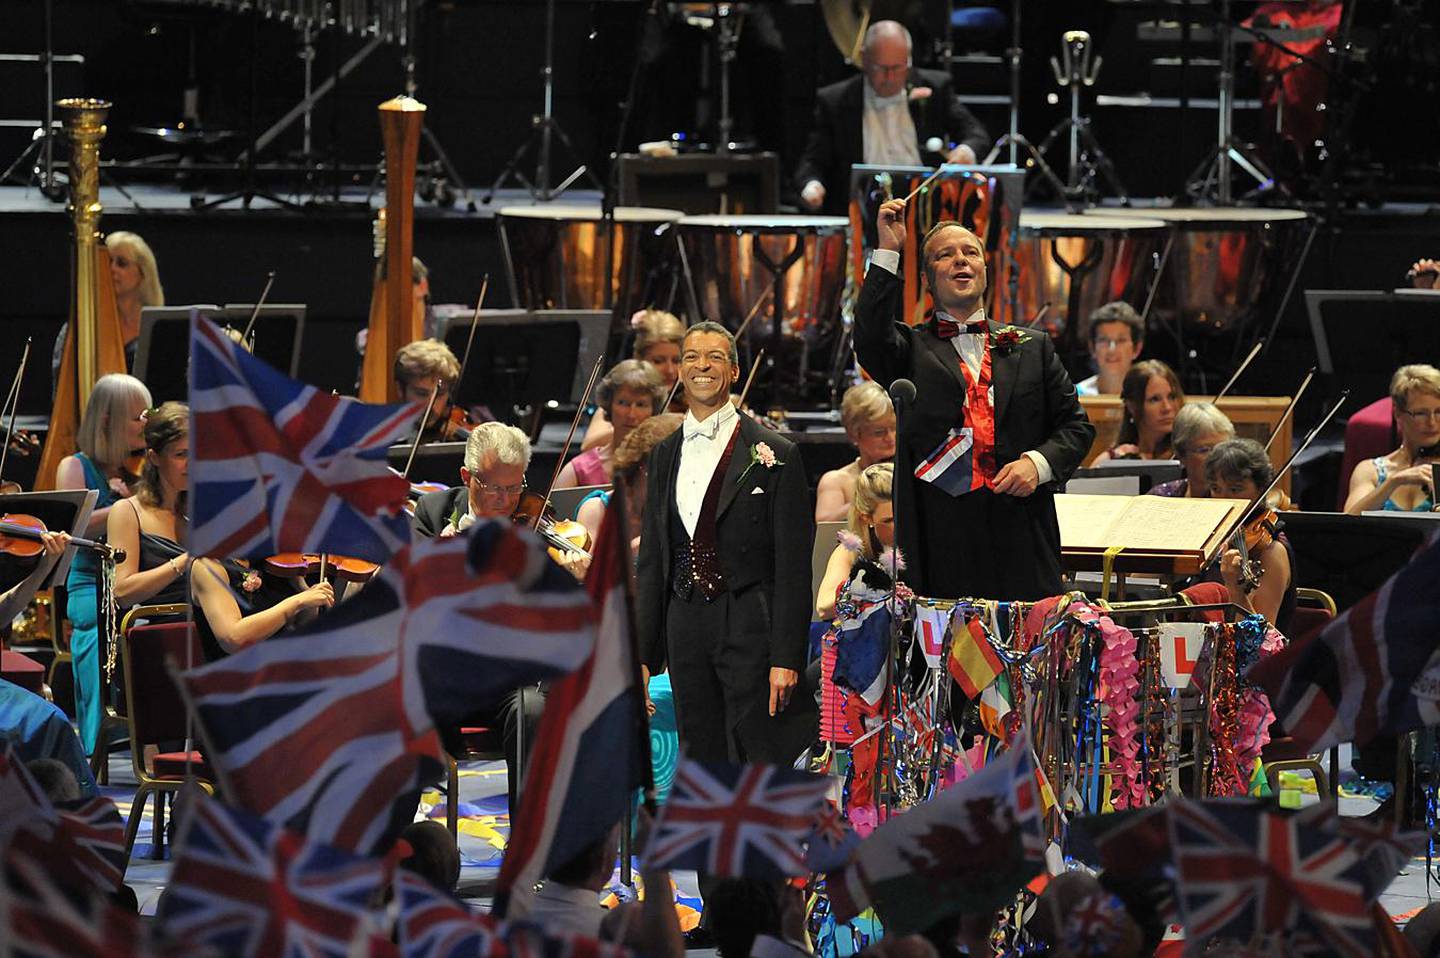 For most of us, listening to live music is a delight. That’s why the Proms at the Royal Albert Hall is a popular highlight of the cultural year. Chris Christodoulou